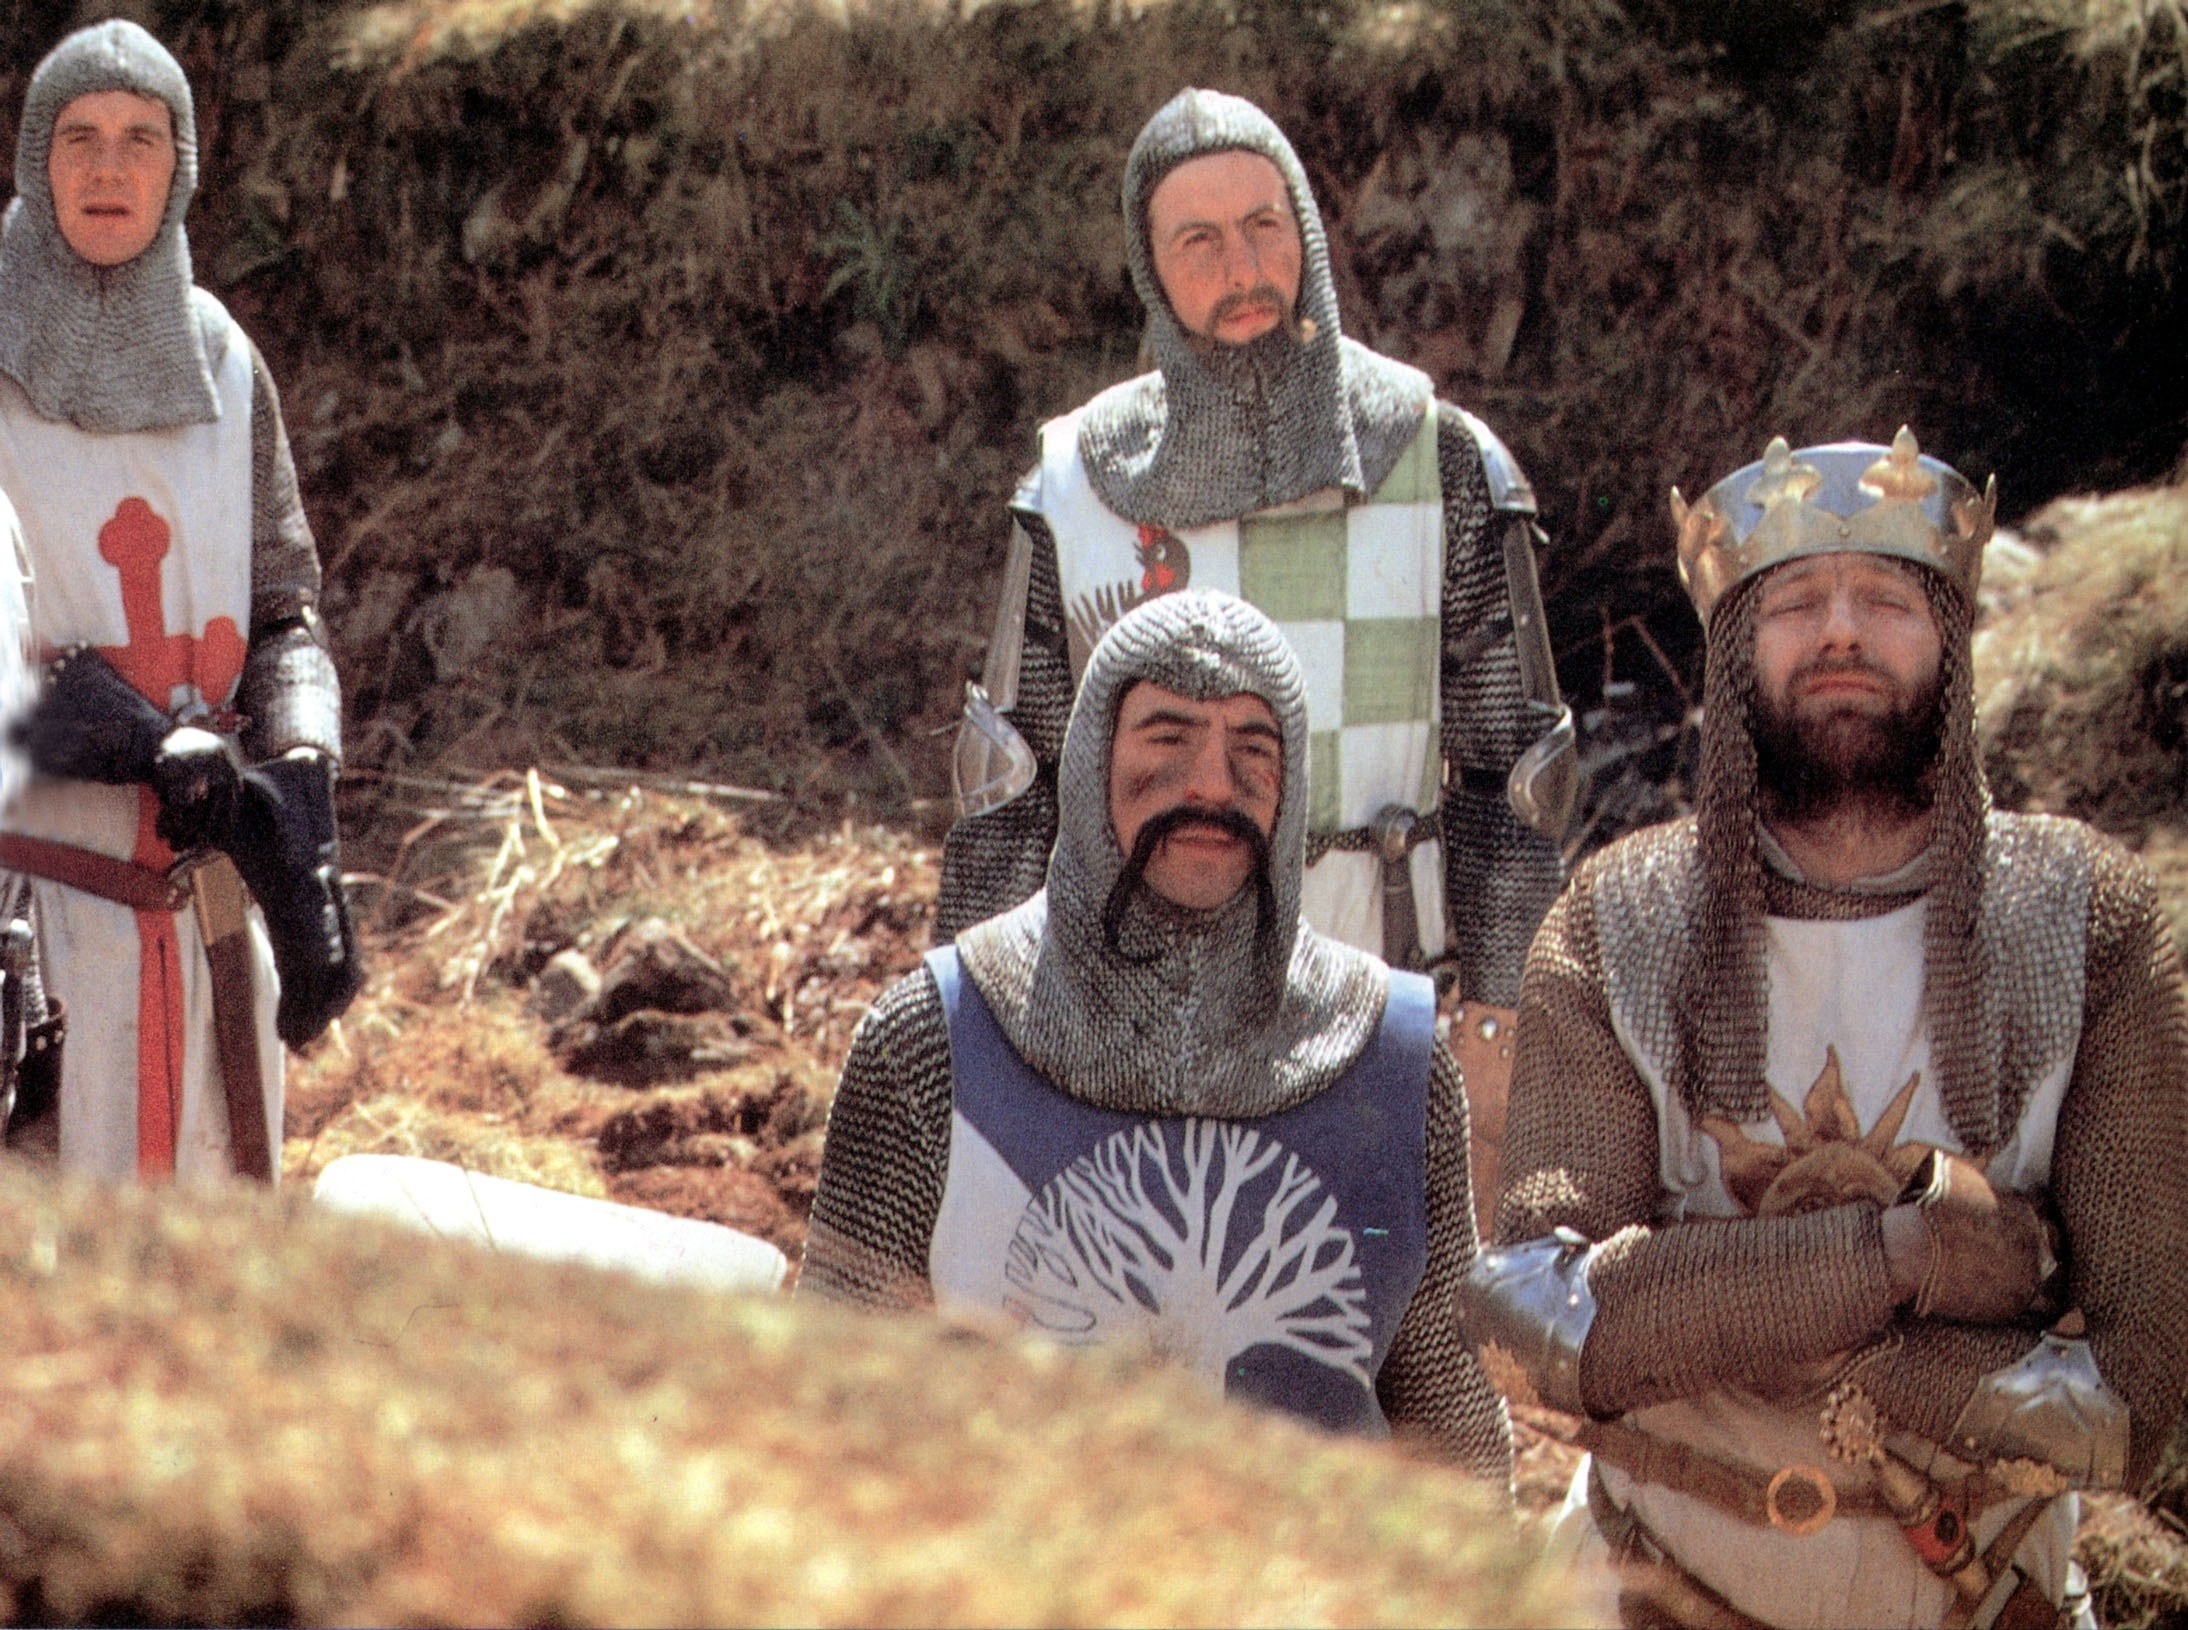 Michael Palin, Eric Idle, Terry Jones and Graham Chapman in Monty Python and the Holy Grail